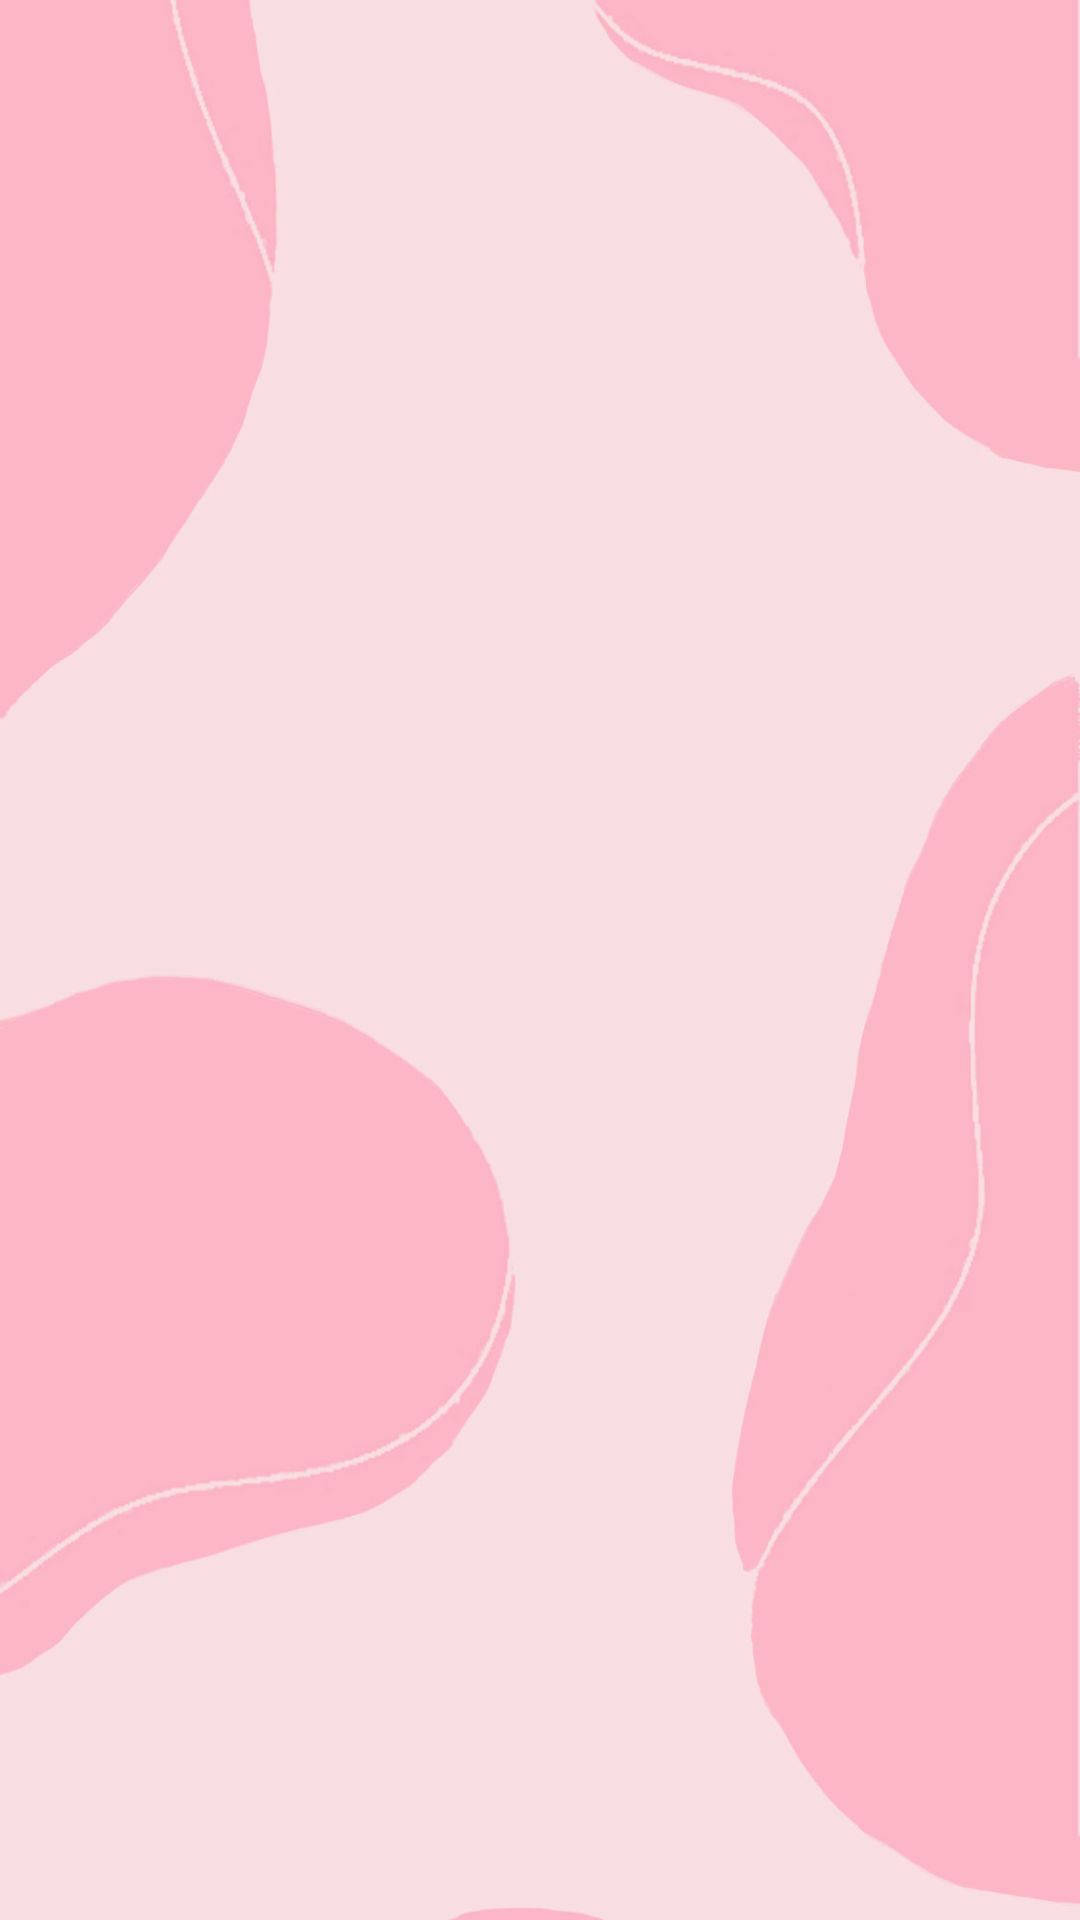 Aesthetic Pink Abstract